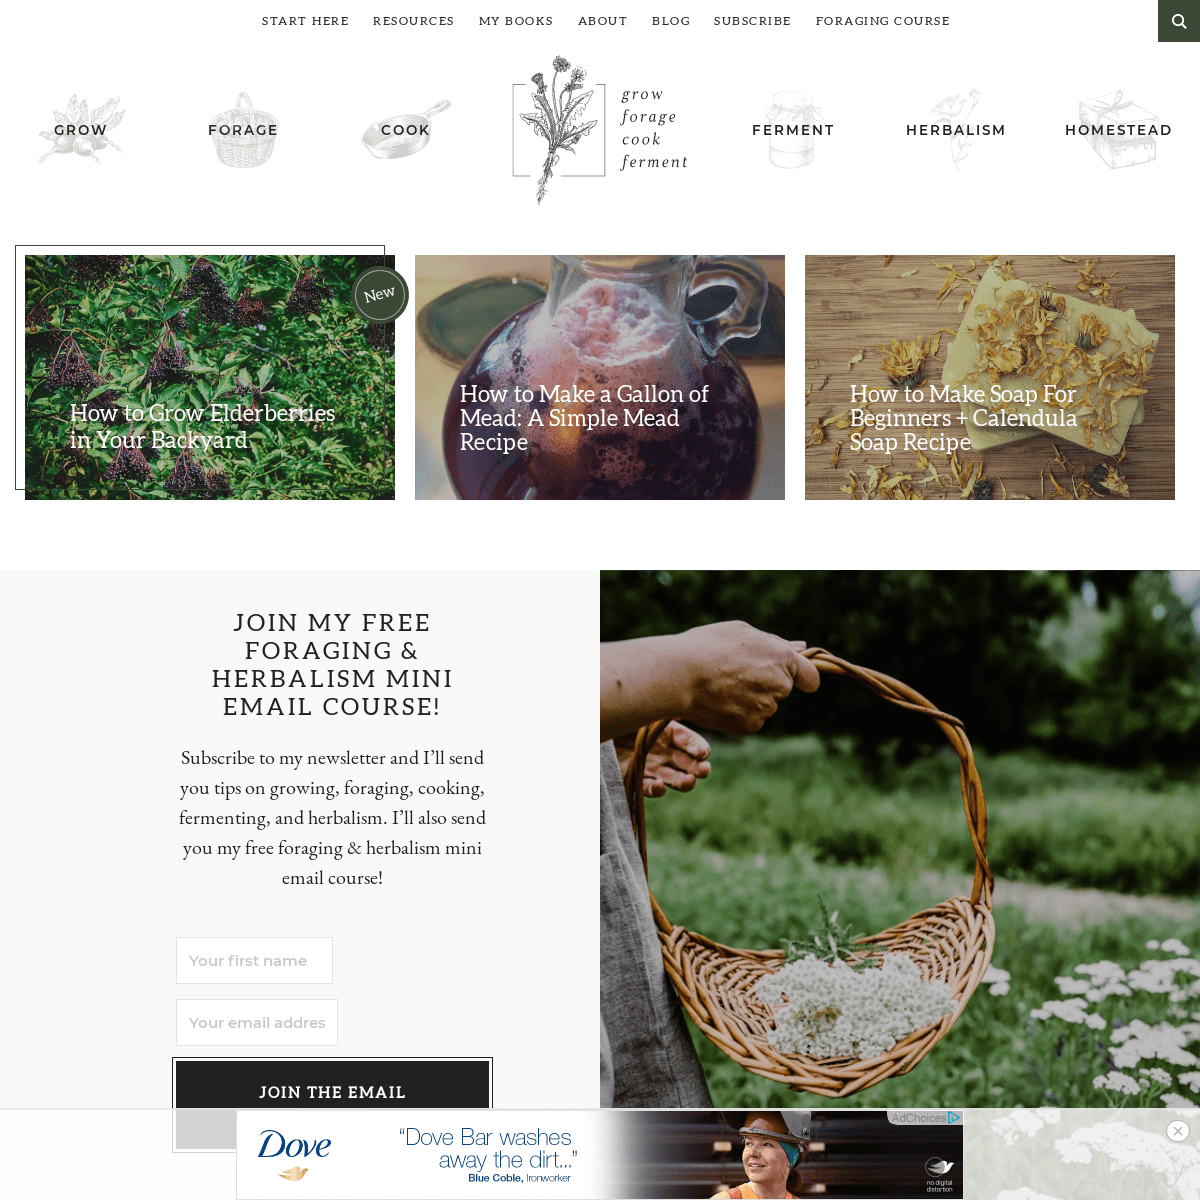 Grow Forage Cook Ferment - Seasonal Recipes, Wildcrafting Guides, Herbal Remedies & More